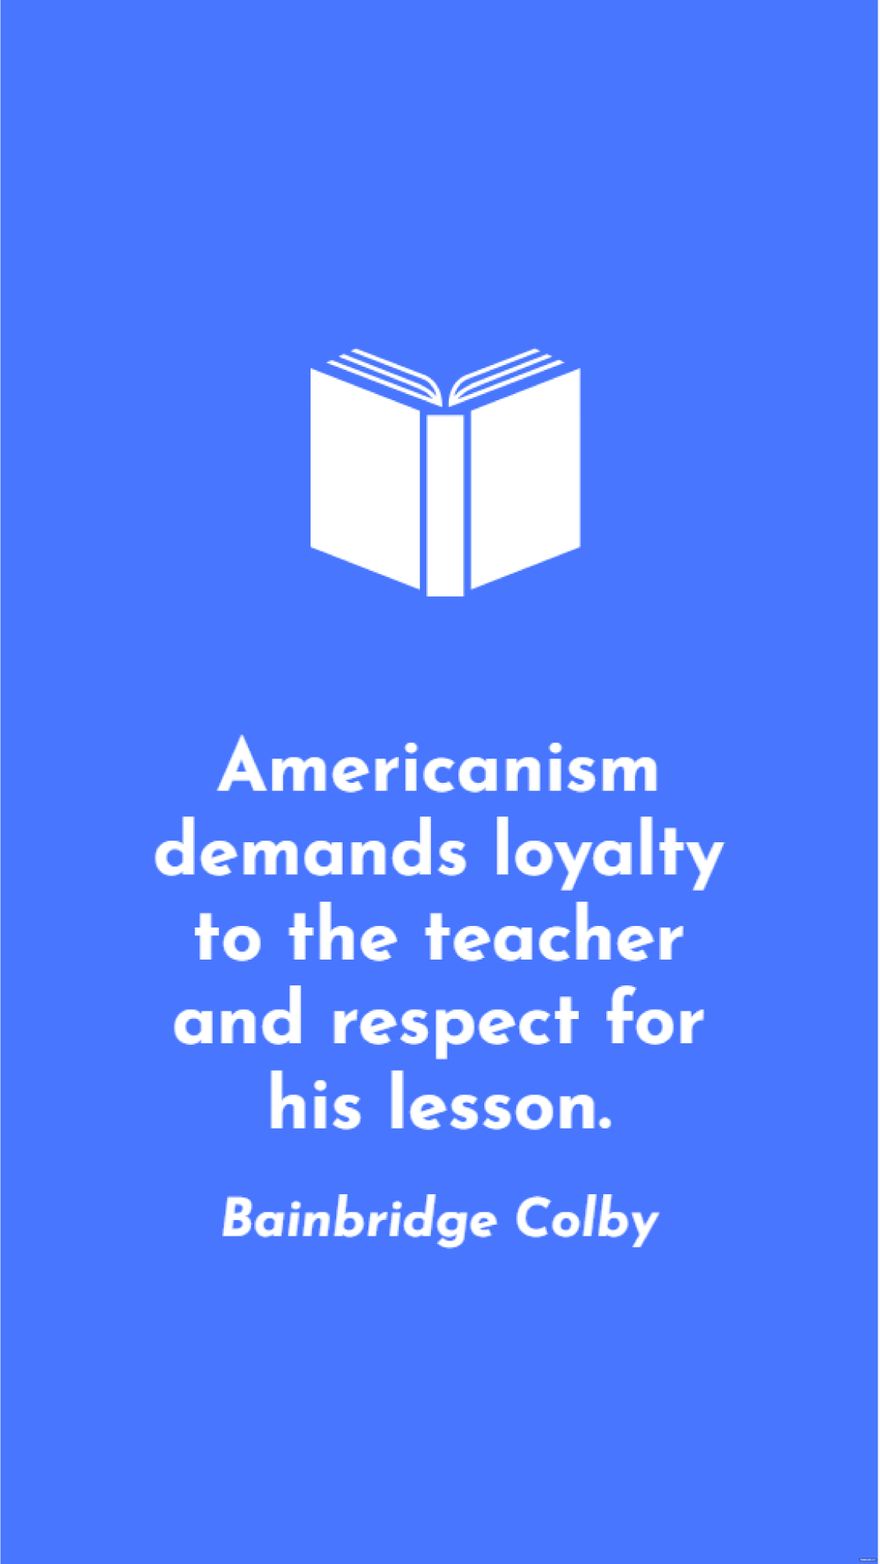 Bainbridge Colby - Americanism demands loyalty to the teacher and respect for his lesson.